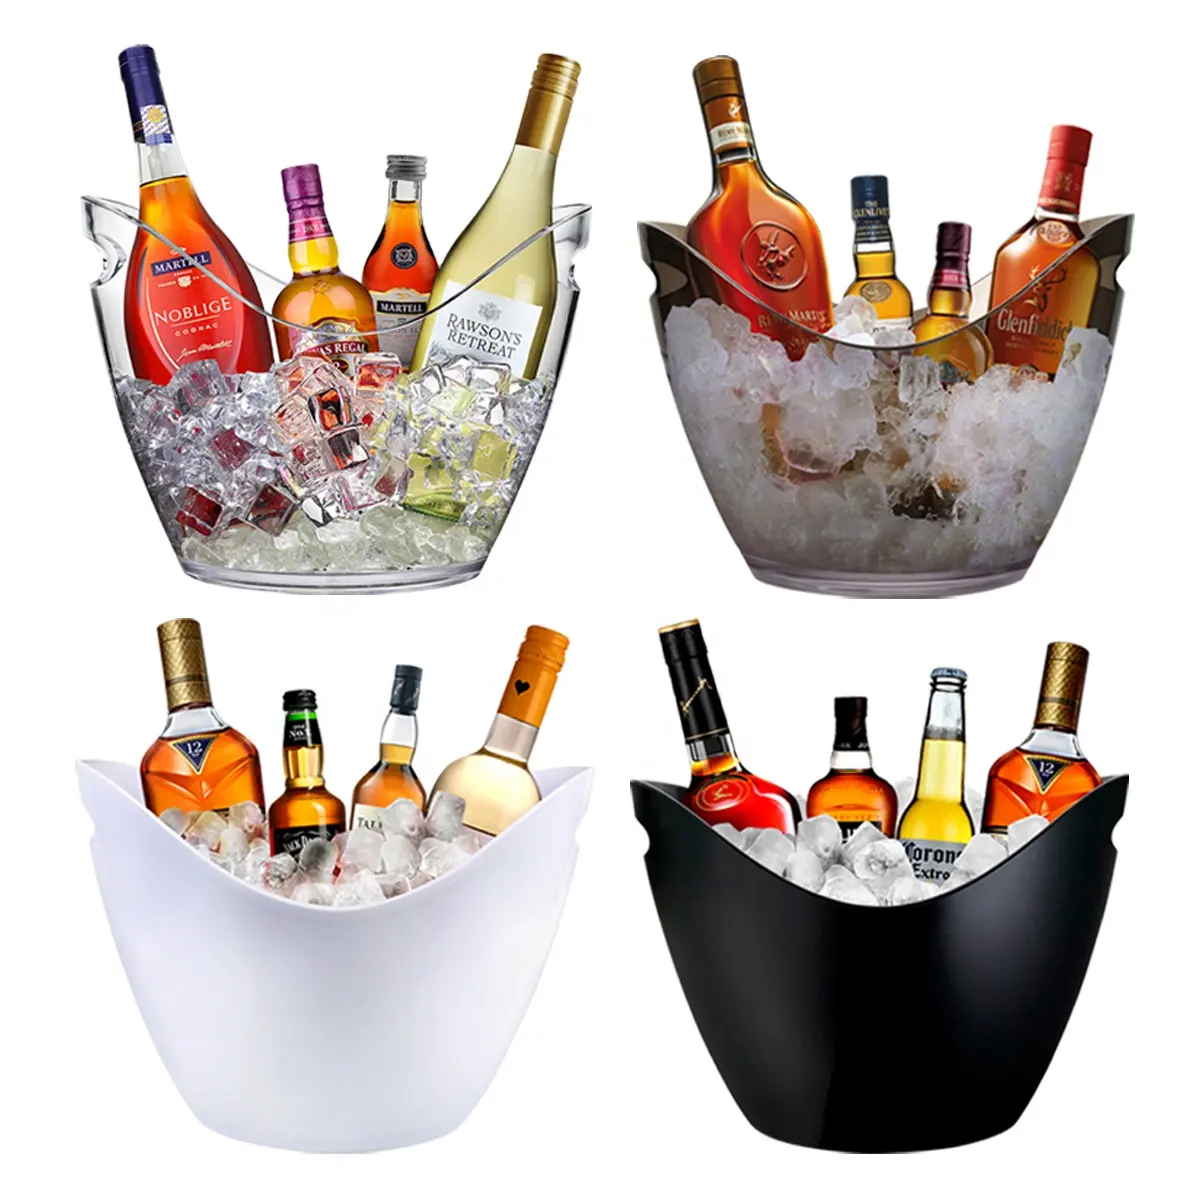 Customized New Design Customized Ice Bucket for Parties with Handles Large Ice Buckets Beer Bucket